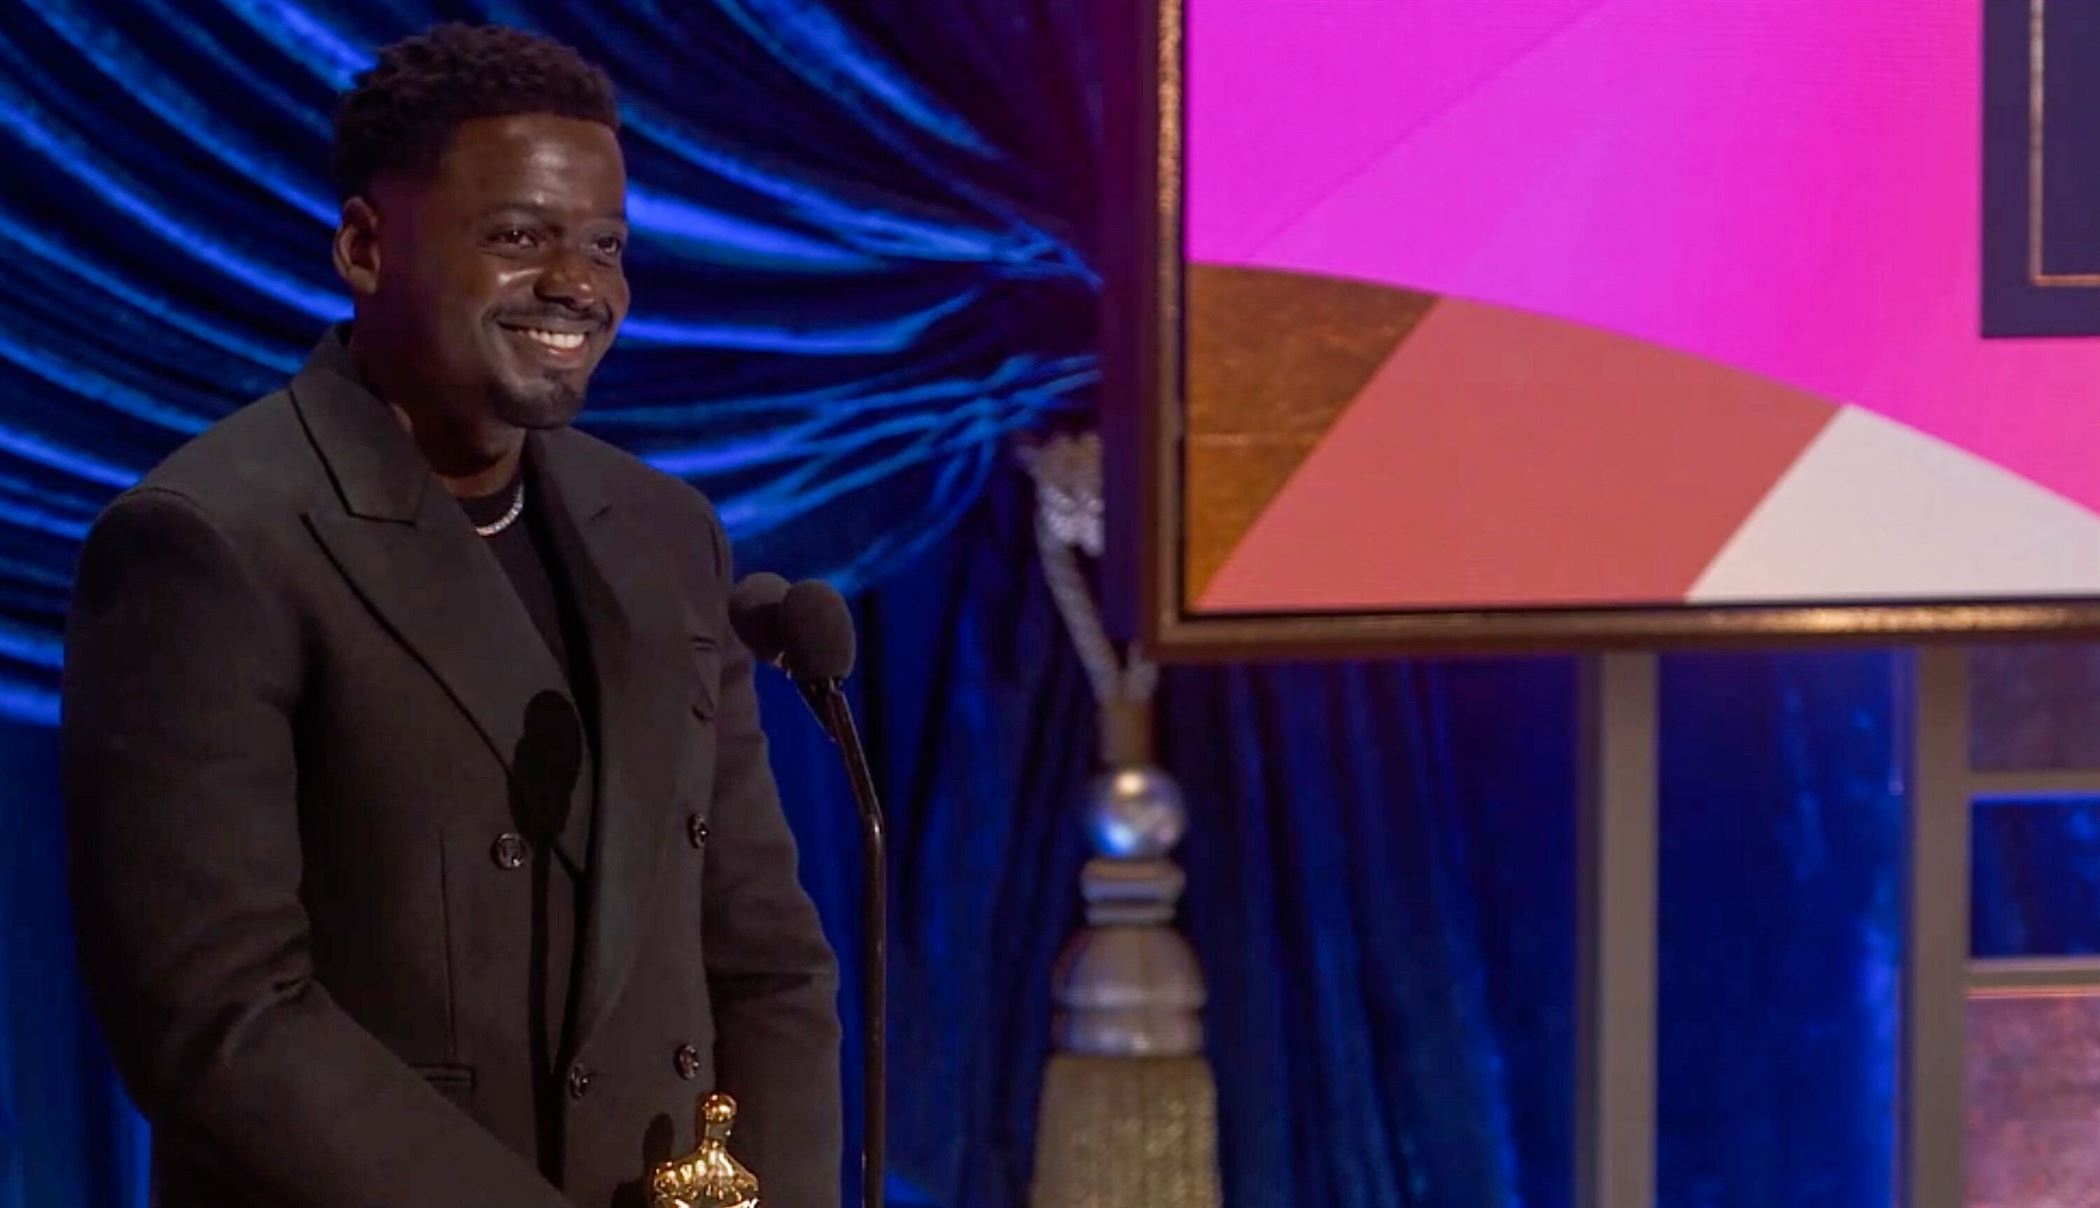 Daniel Kaluuya won the award for best supporting actor. Photo courtesy of AMPAS